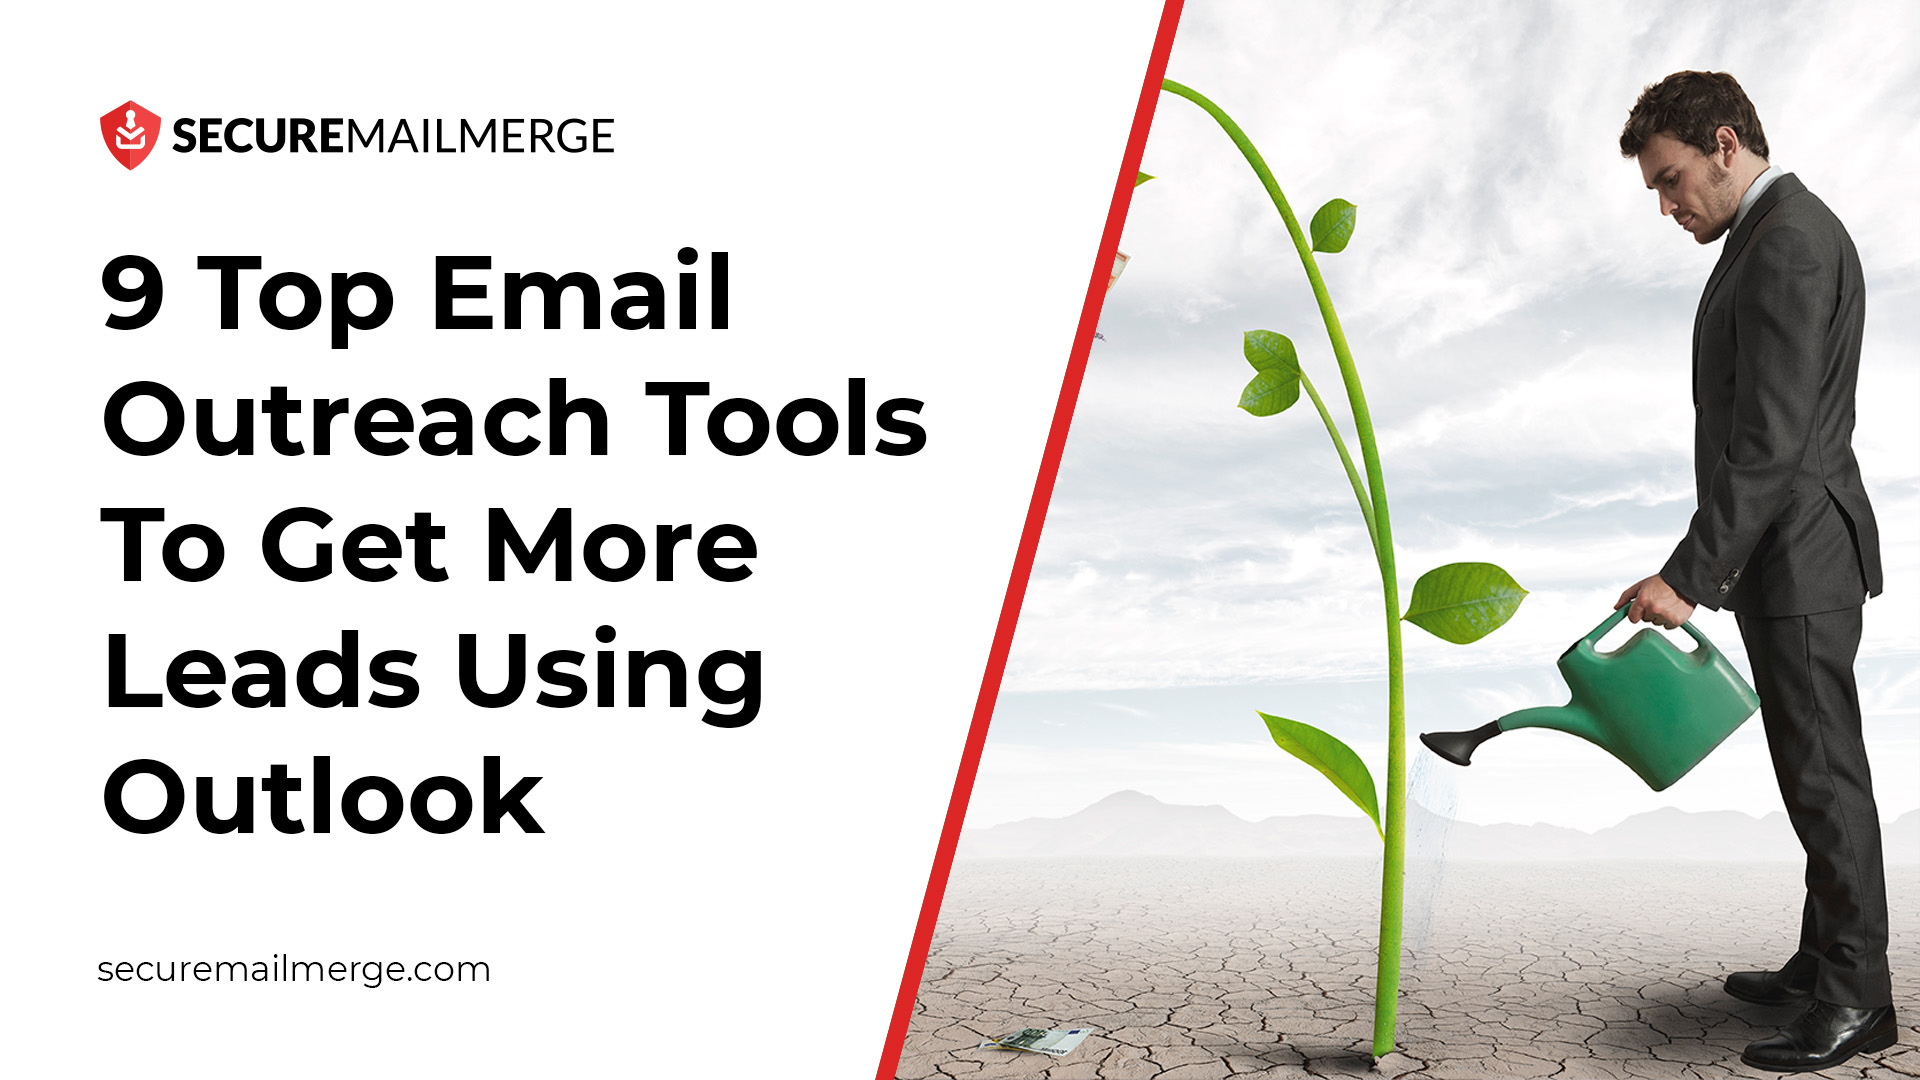 9 Top Email Outreach Tools To Get More Leads Using Outlook